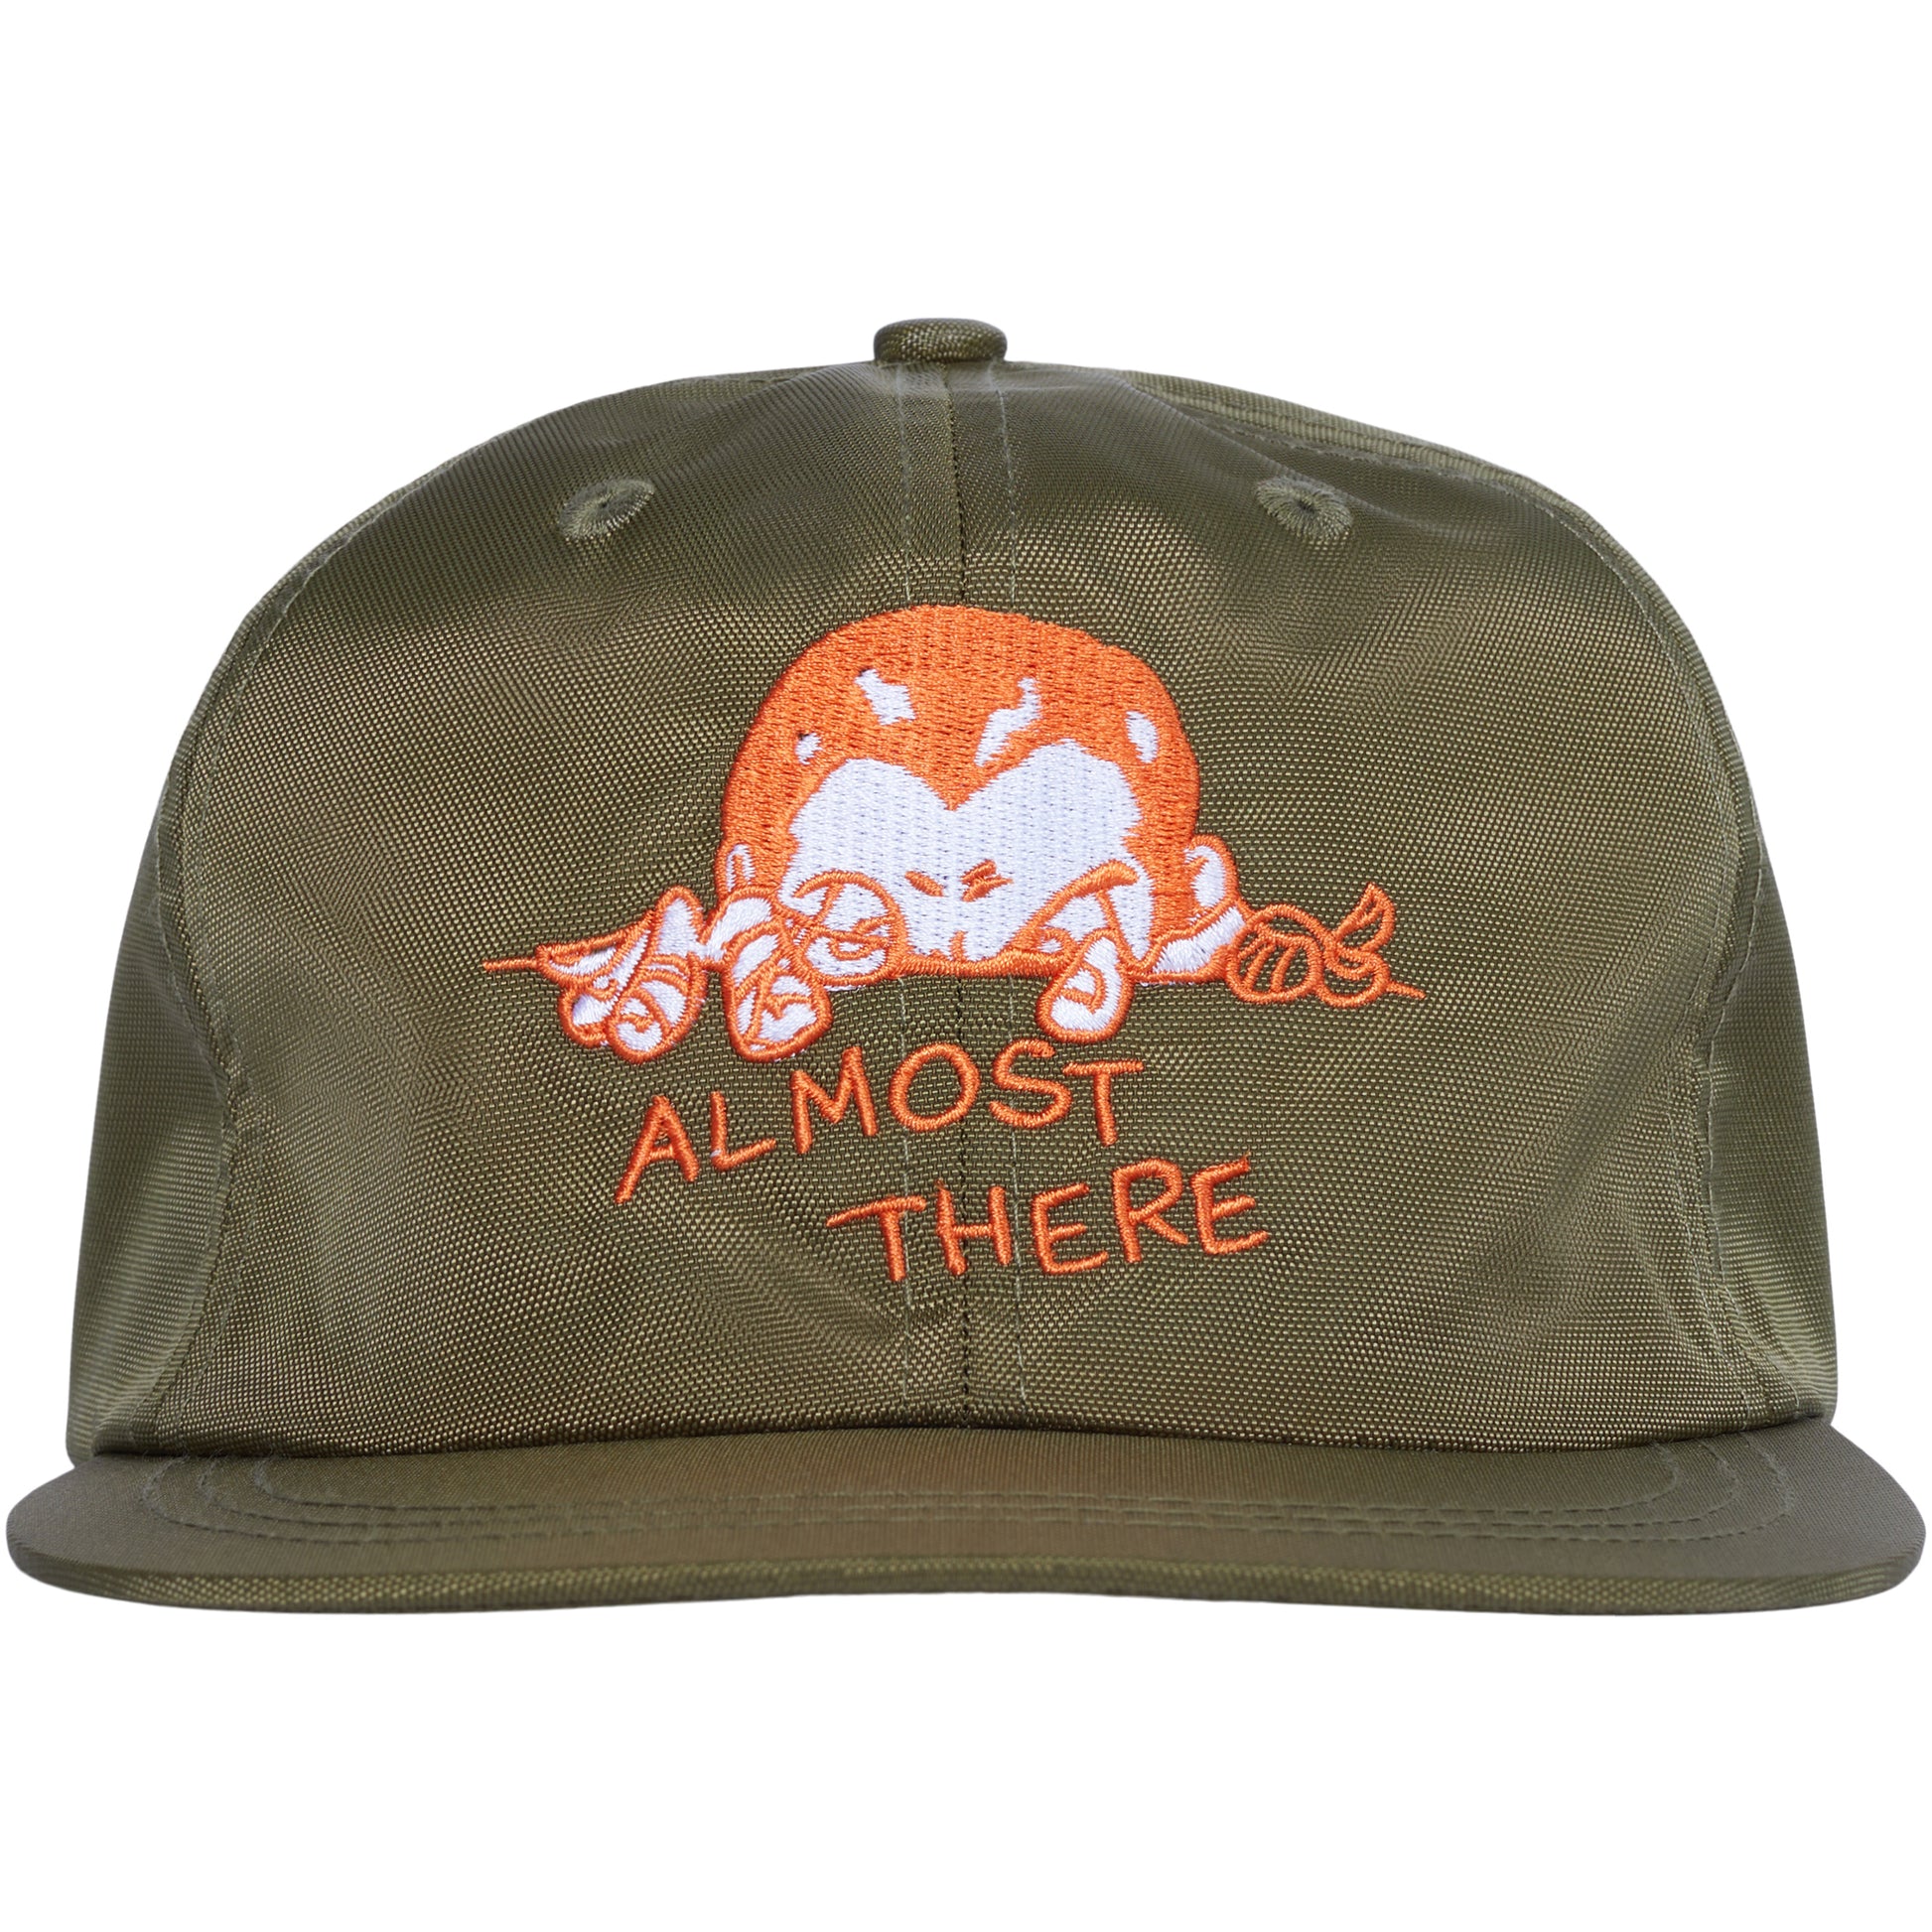 nylon tech style hat with embroidered graphic artwork 